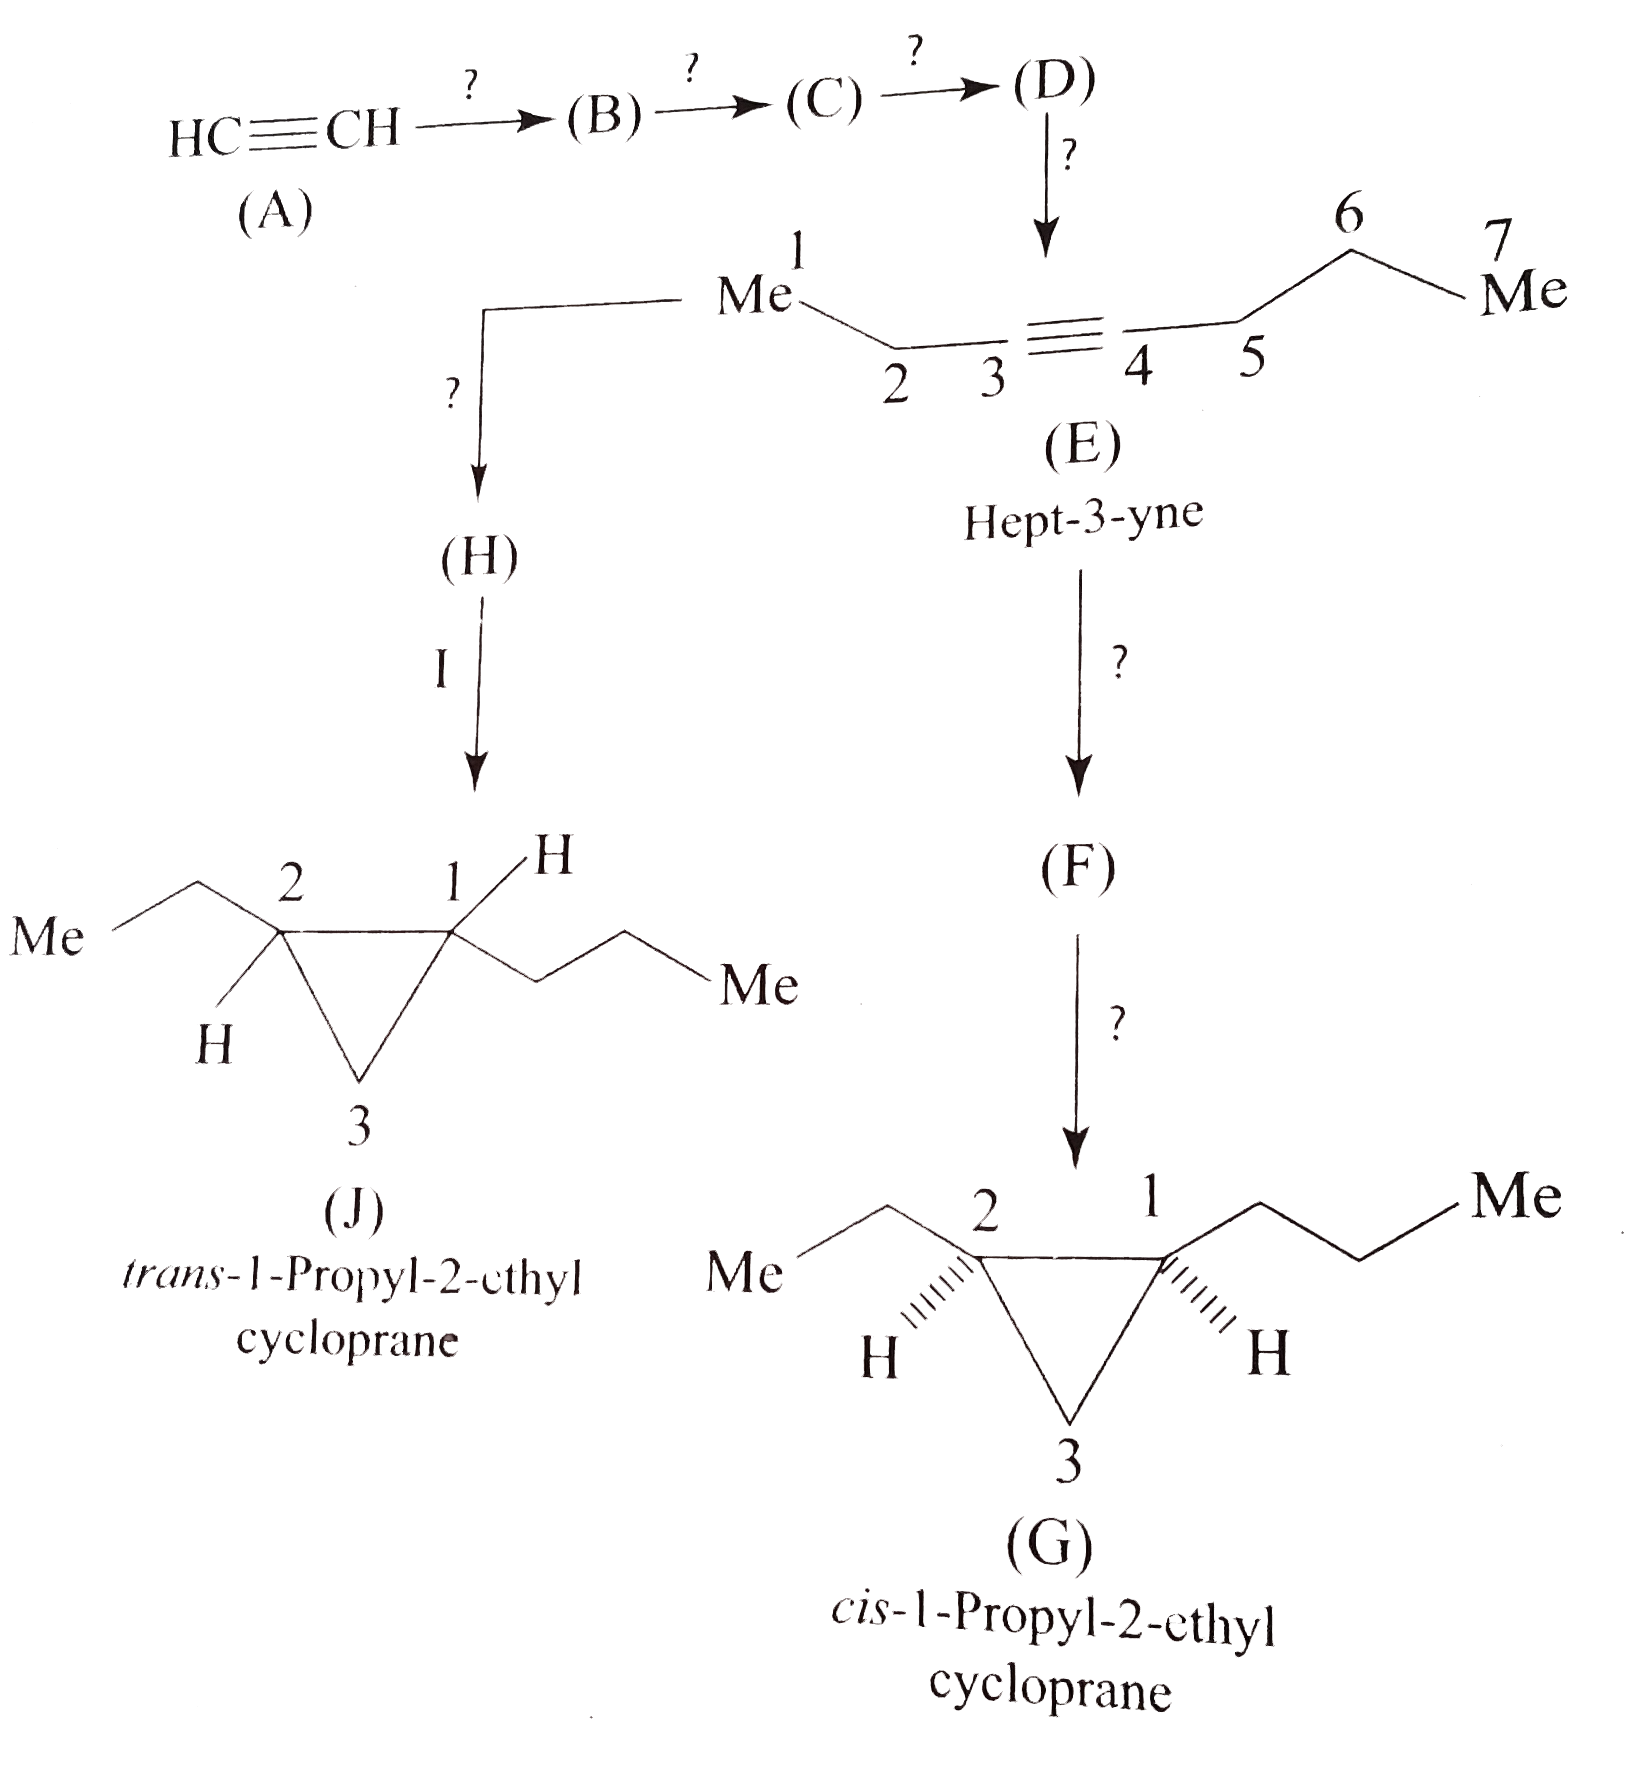 Complete the following reactions:   HC-=CHoverset(?)rarr(B)overset(?)rarr(C)overset(?)rarr(D)    The compounds (E) to (F) can be obtained by four different reagents. Give the names of the reagents.